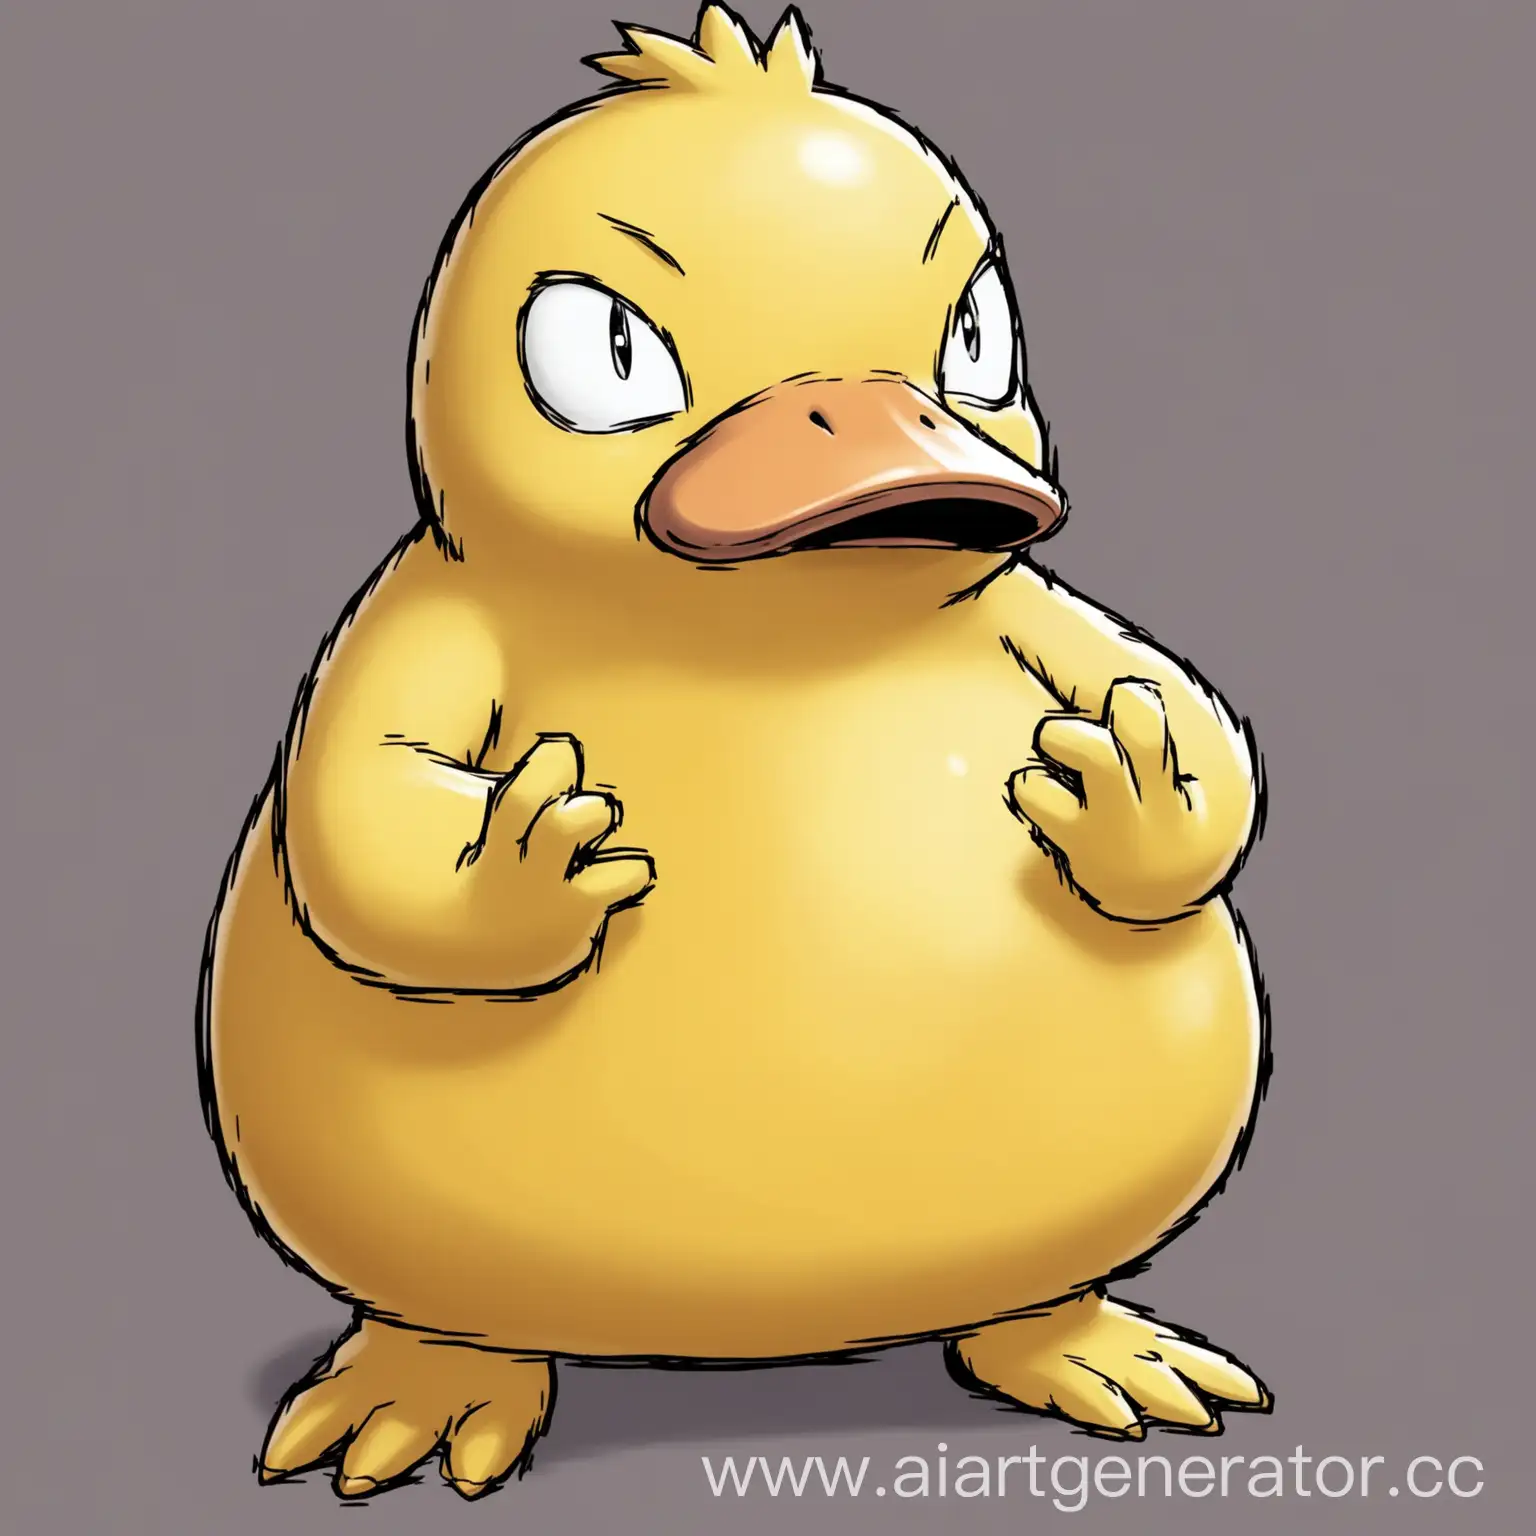 Mischievous-Pokemon-Psyduck-with-Sly-Expression-and-Rubbing-Hands